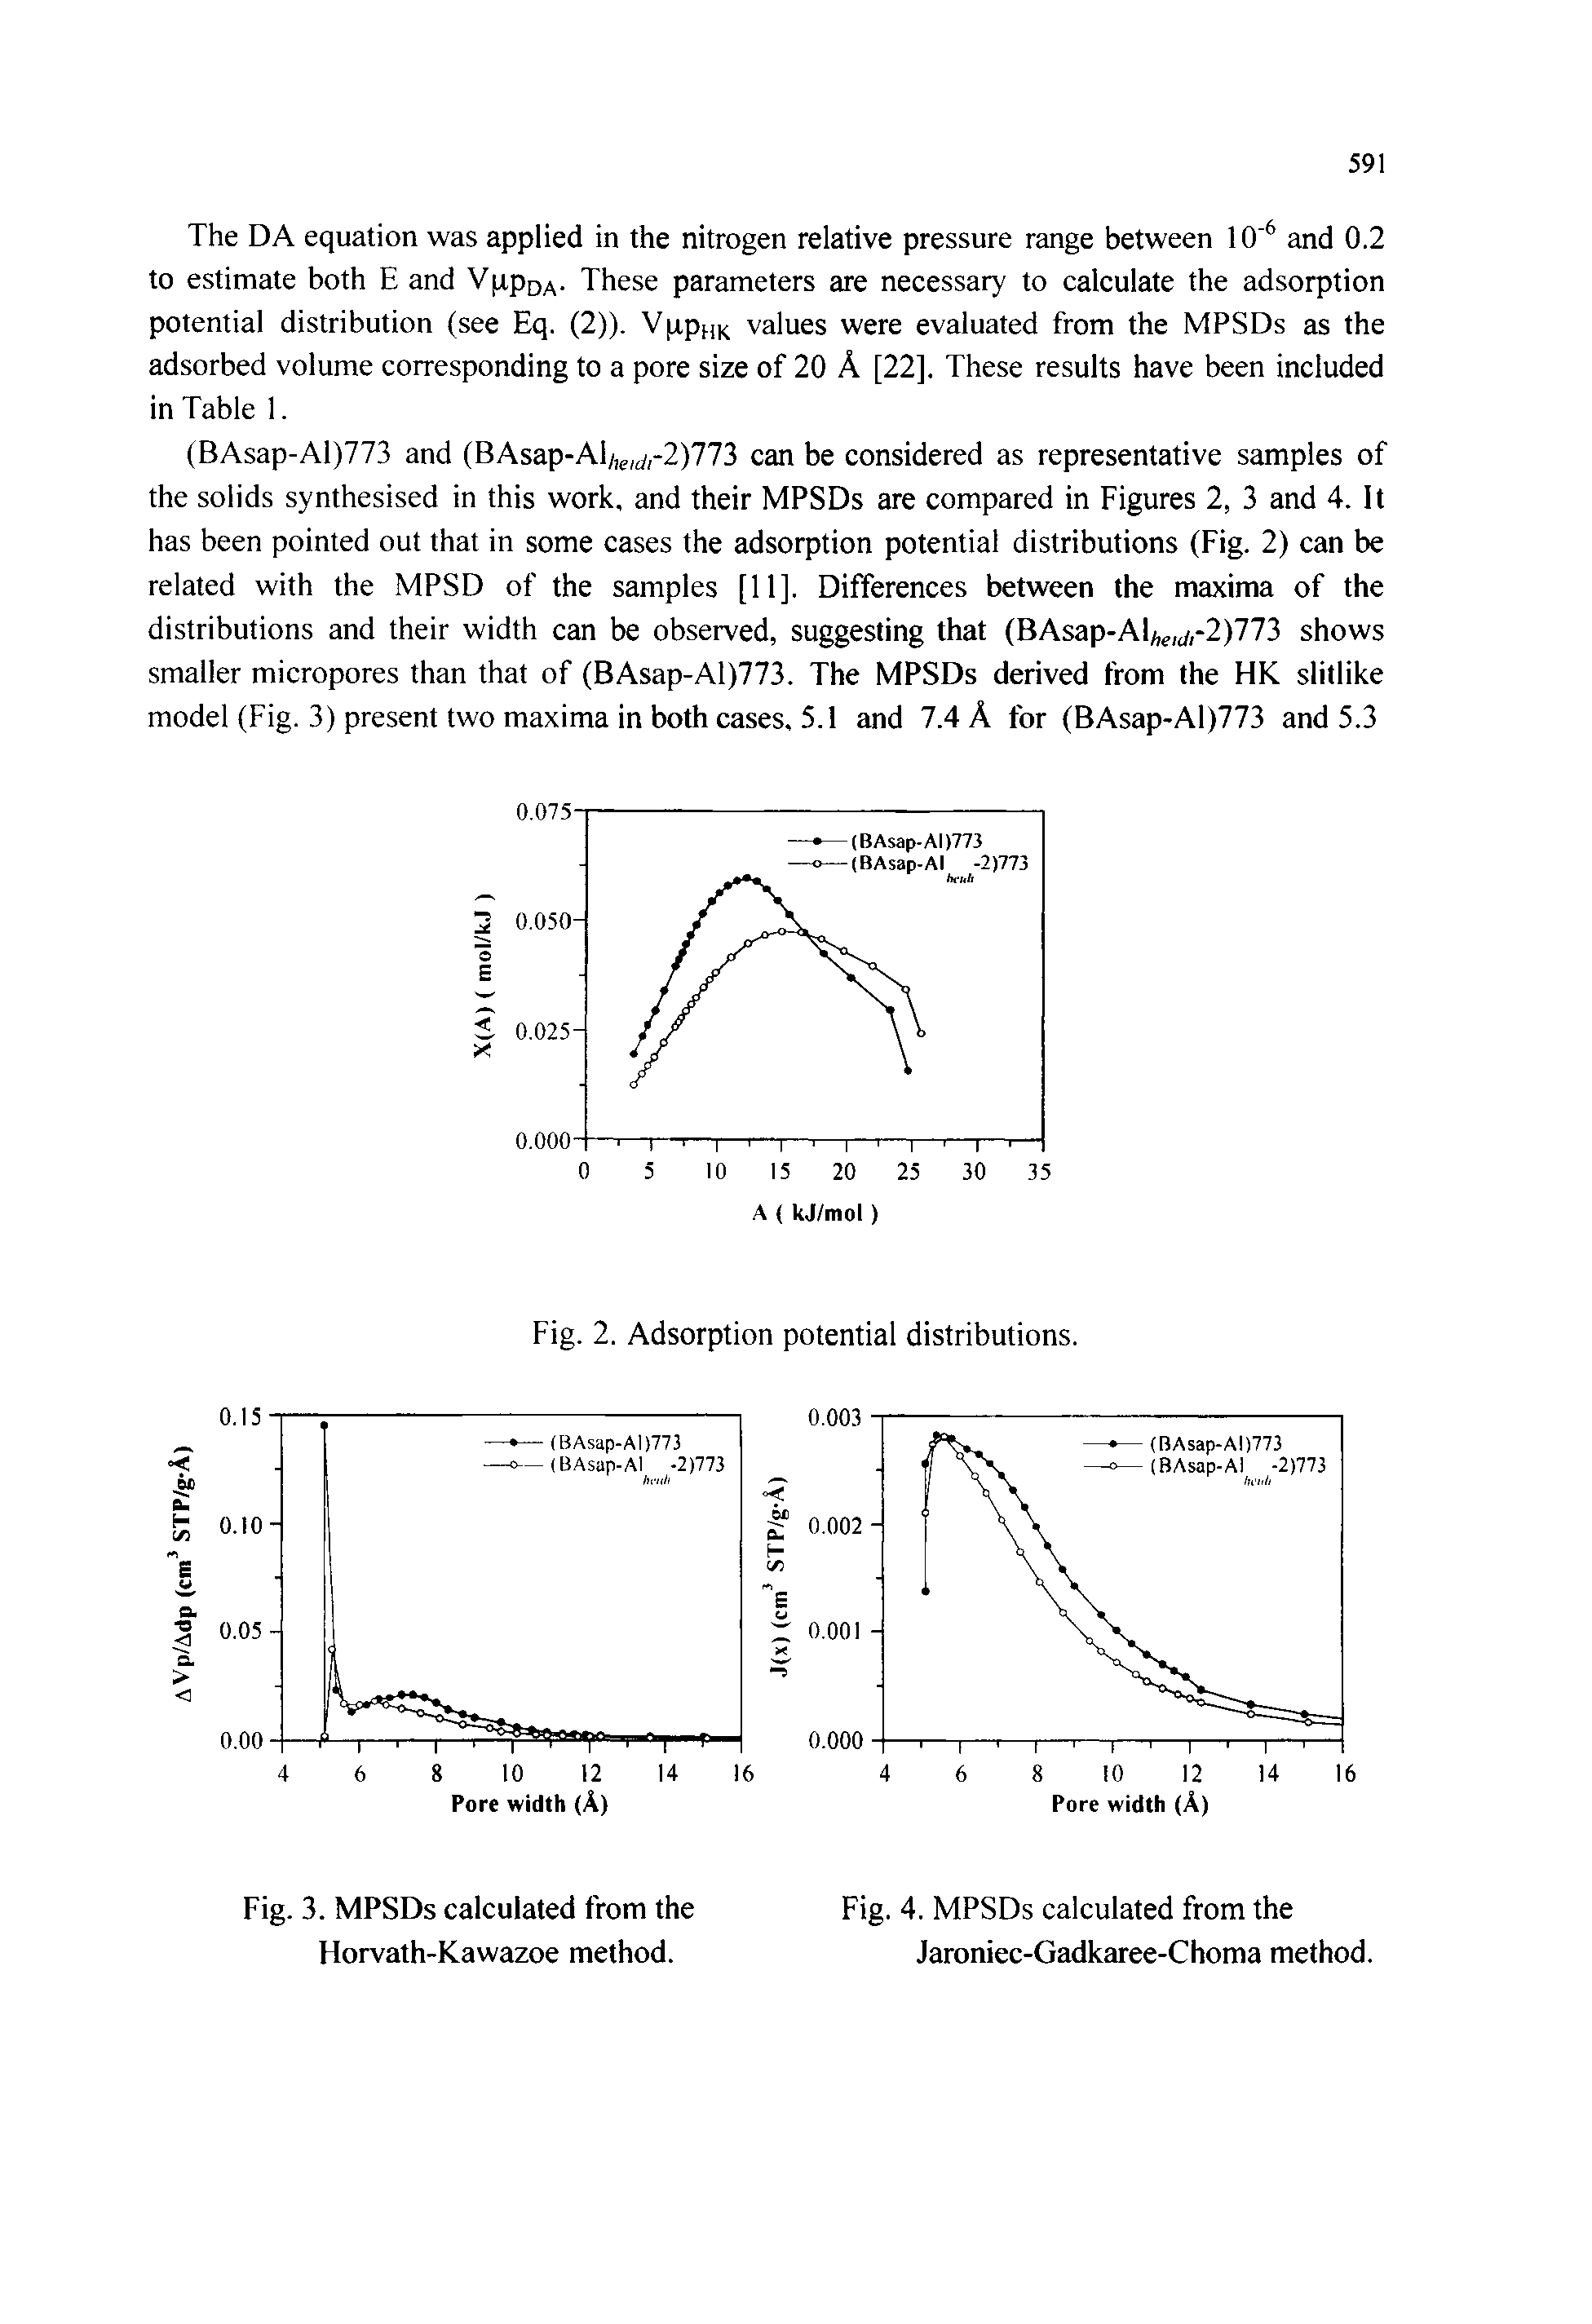 Fig. 3. MPSDs calculated from the Horvath-Kawazoe method.